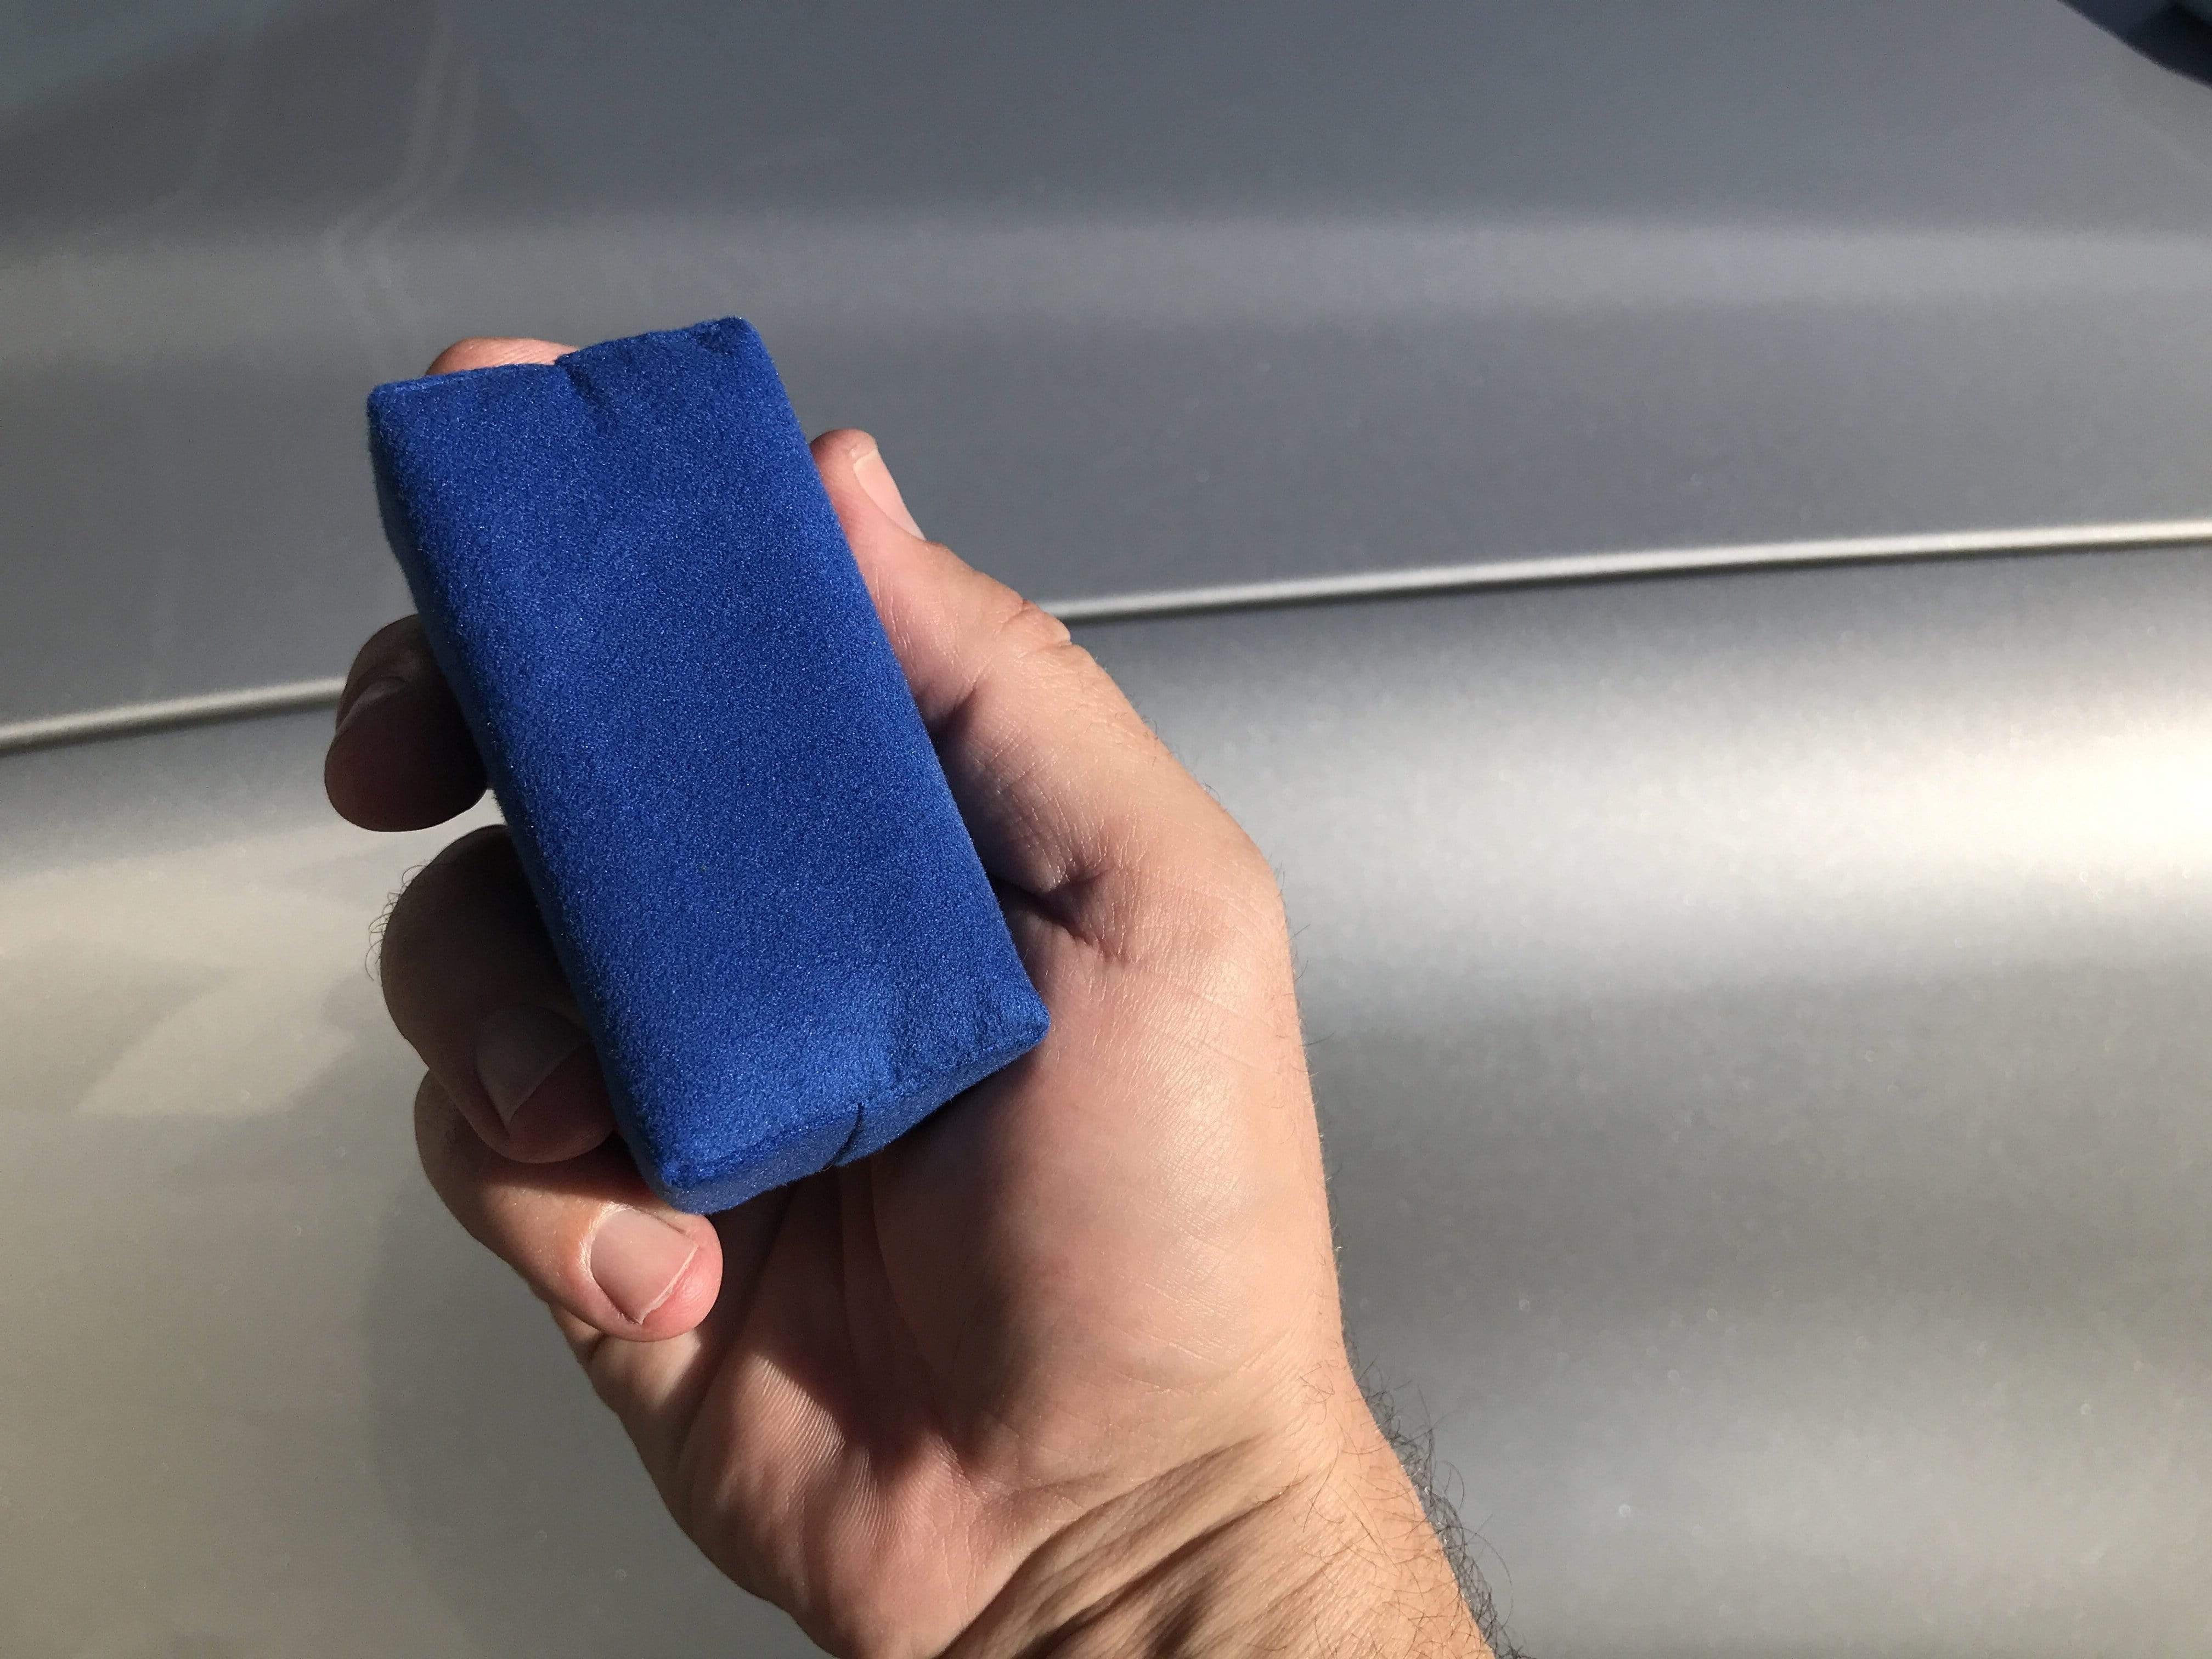 Autofiber Thick [Saver Applicator Terry] Ceramic Coating Applicator Sponge  | 12 Pack | with Plastic Barrier to Reduce Product Waste. (Blue/Gray)